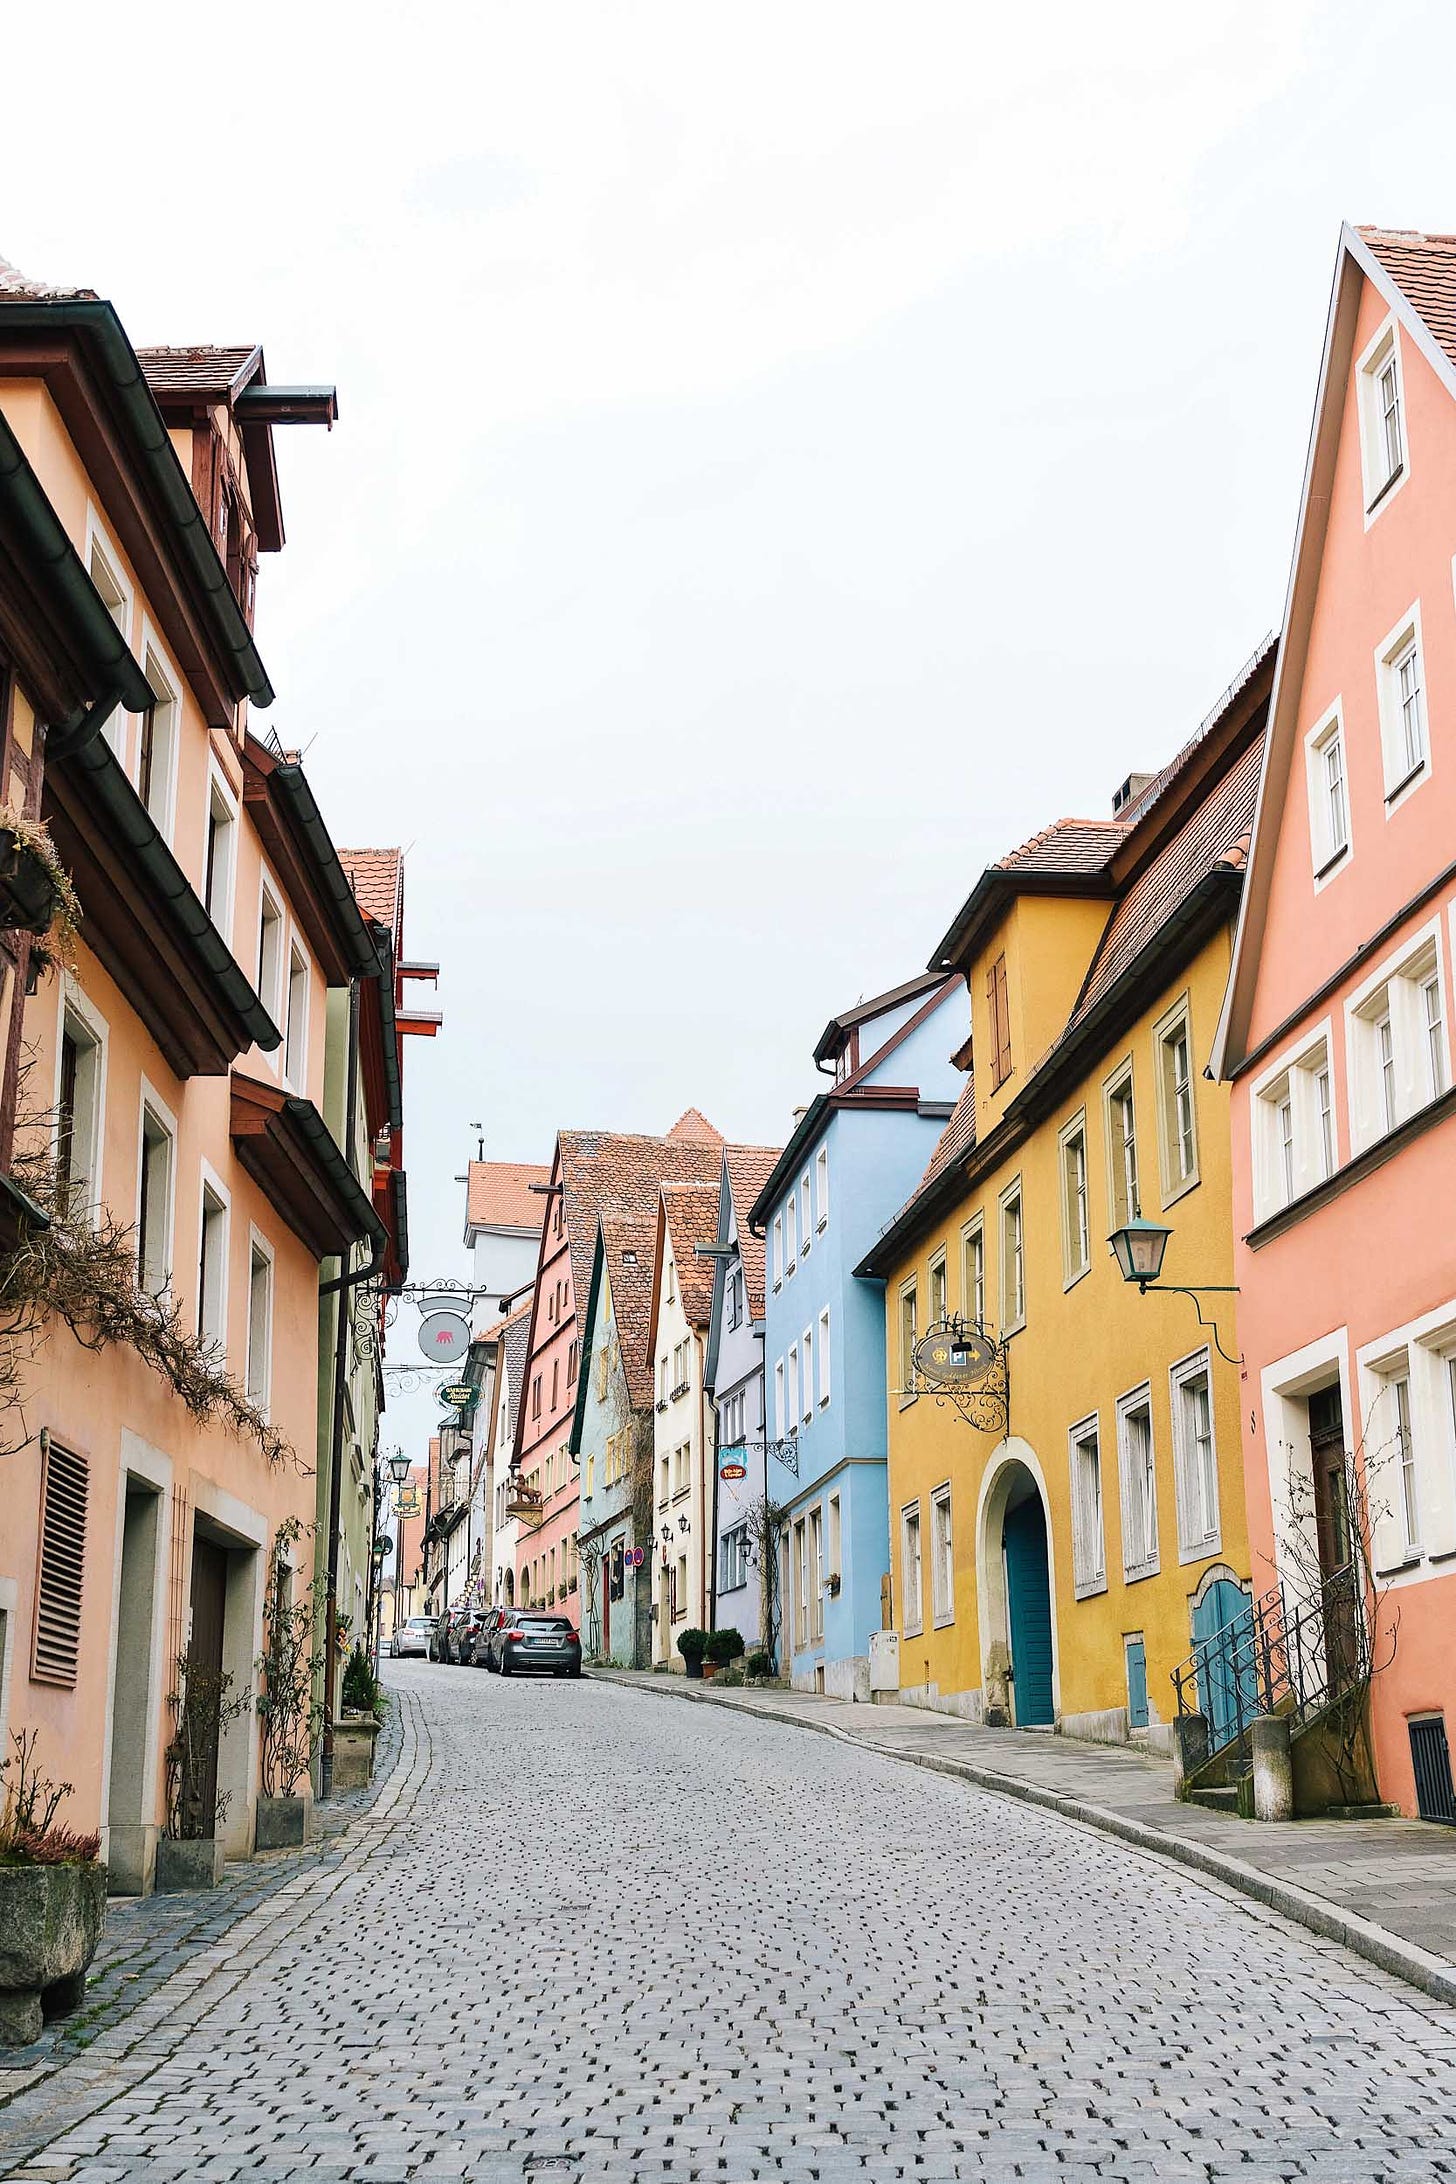 Rothenburg ob der Tauber in Germany's Bavaria region is a real life fairytale